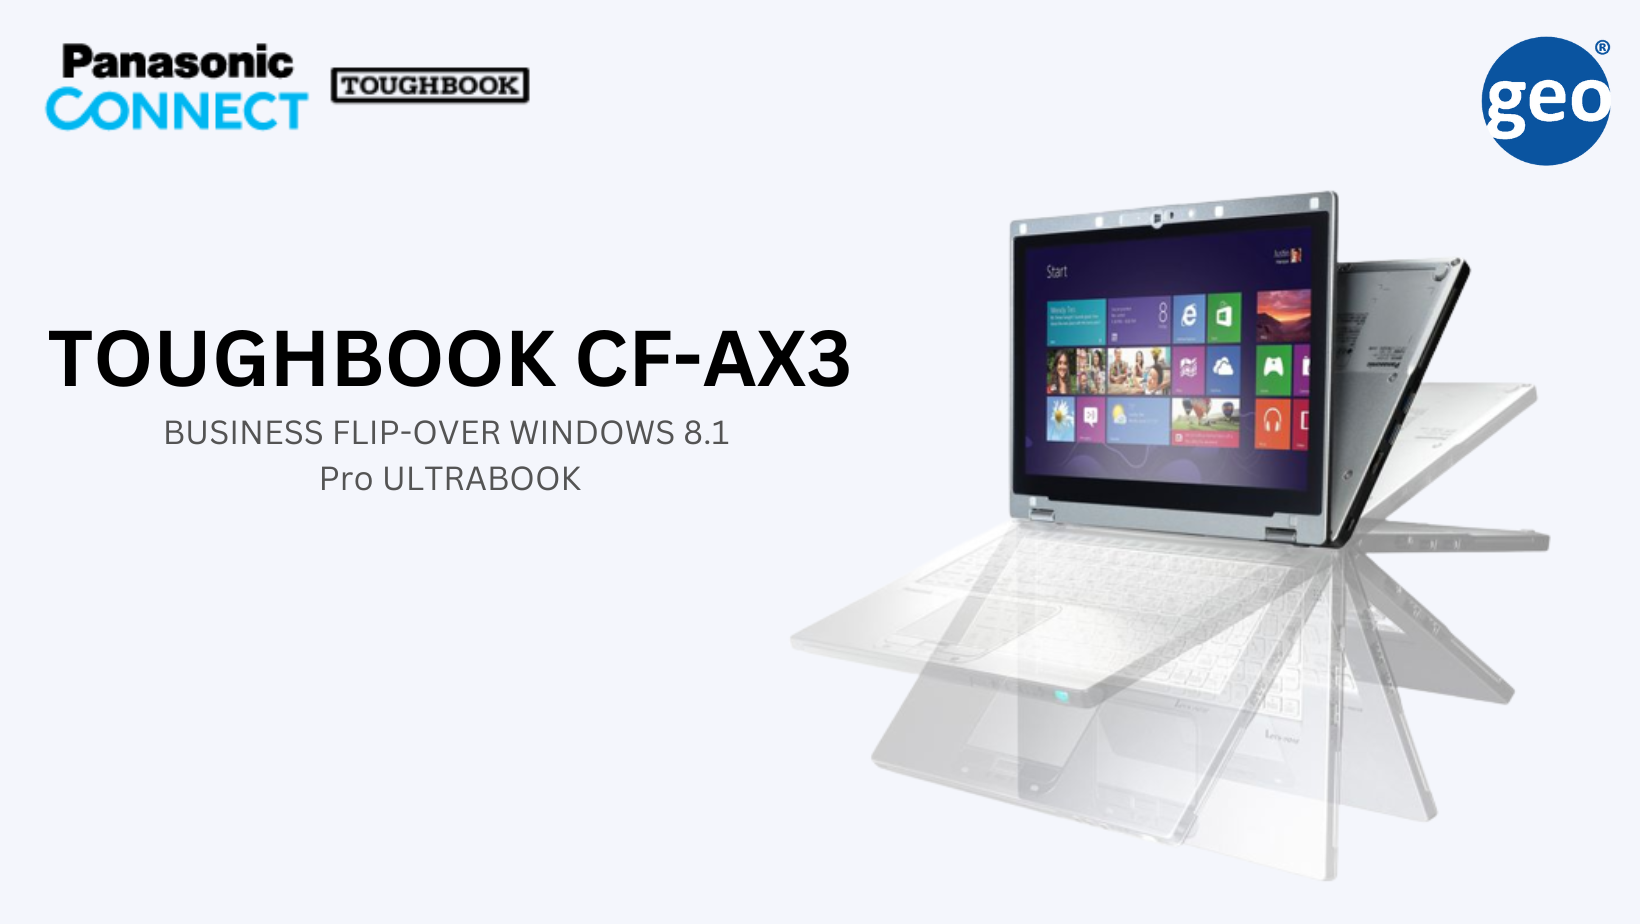 Panasonic: Toughbook CF-AX3 Flip-over Windows 8.1 Pro Ultrabook offers new level of working freedom for business users making it ideal for mobile sales workforce, merchandisers and executives.